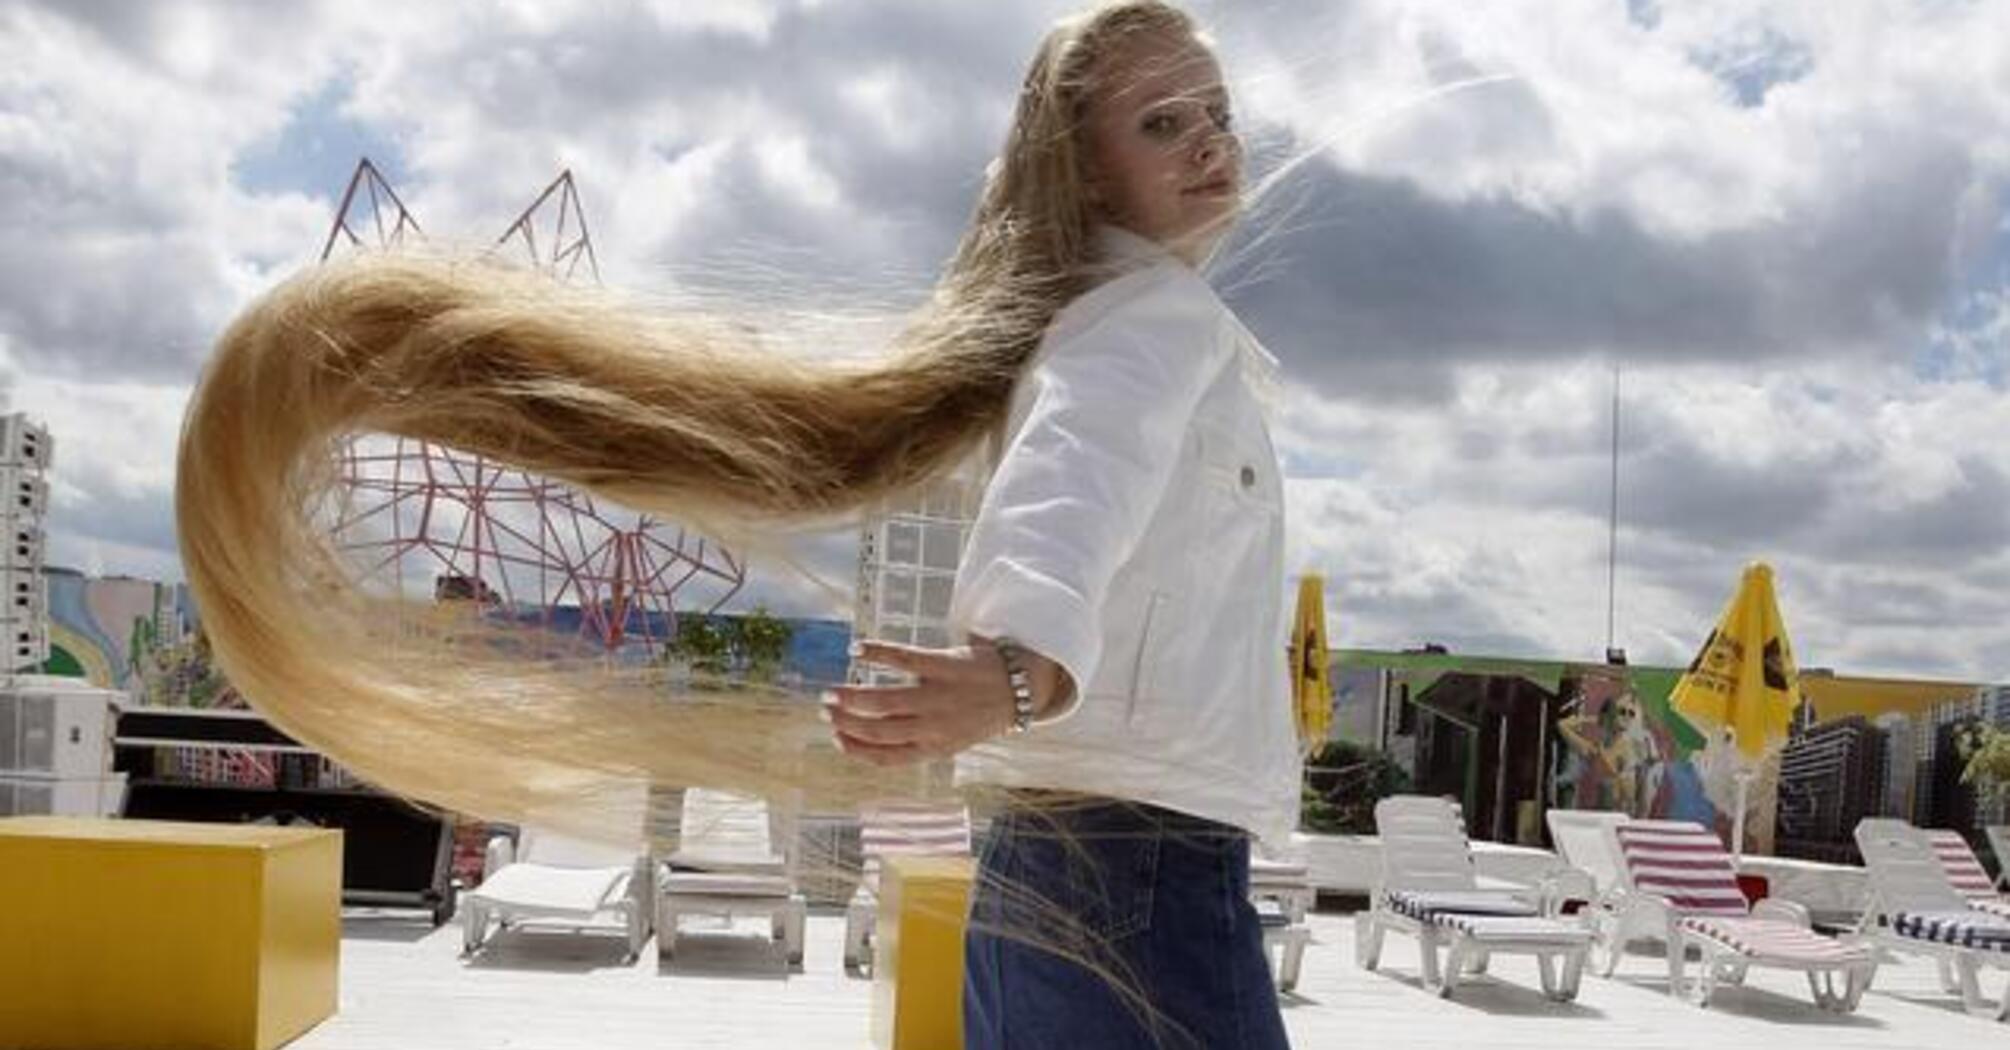 Ukrainian woman sets record for the longest hair on the planet